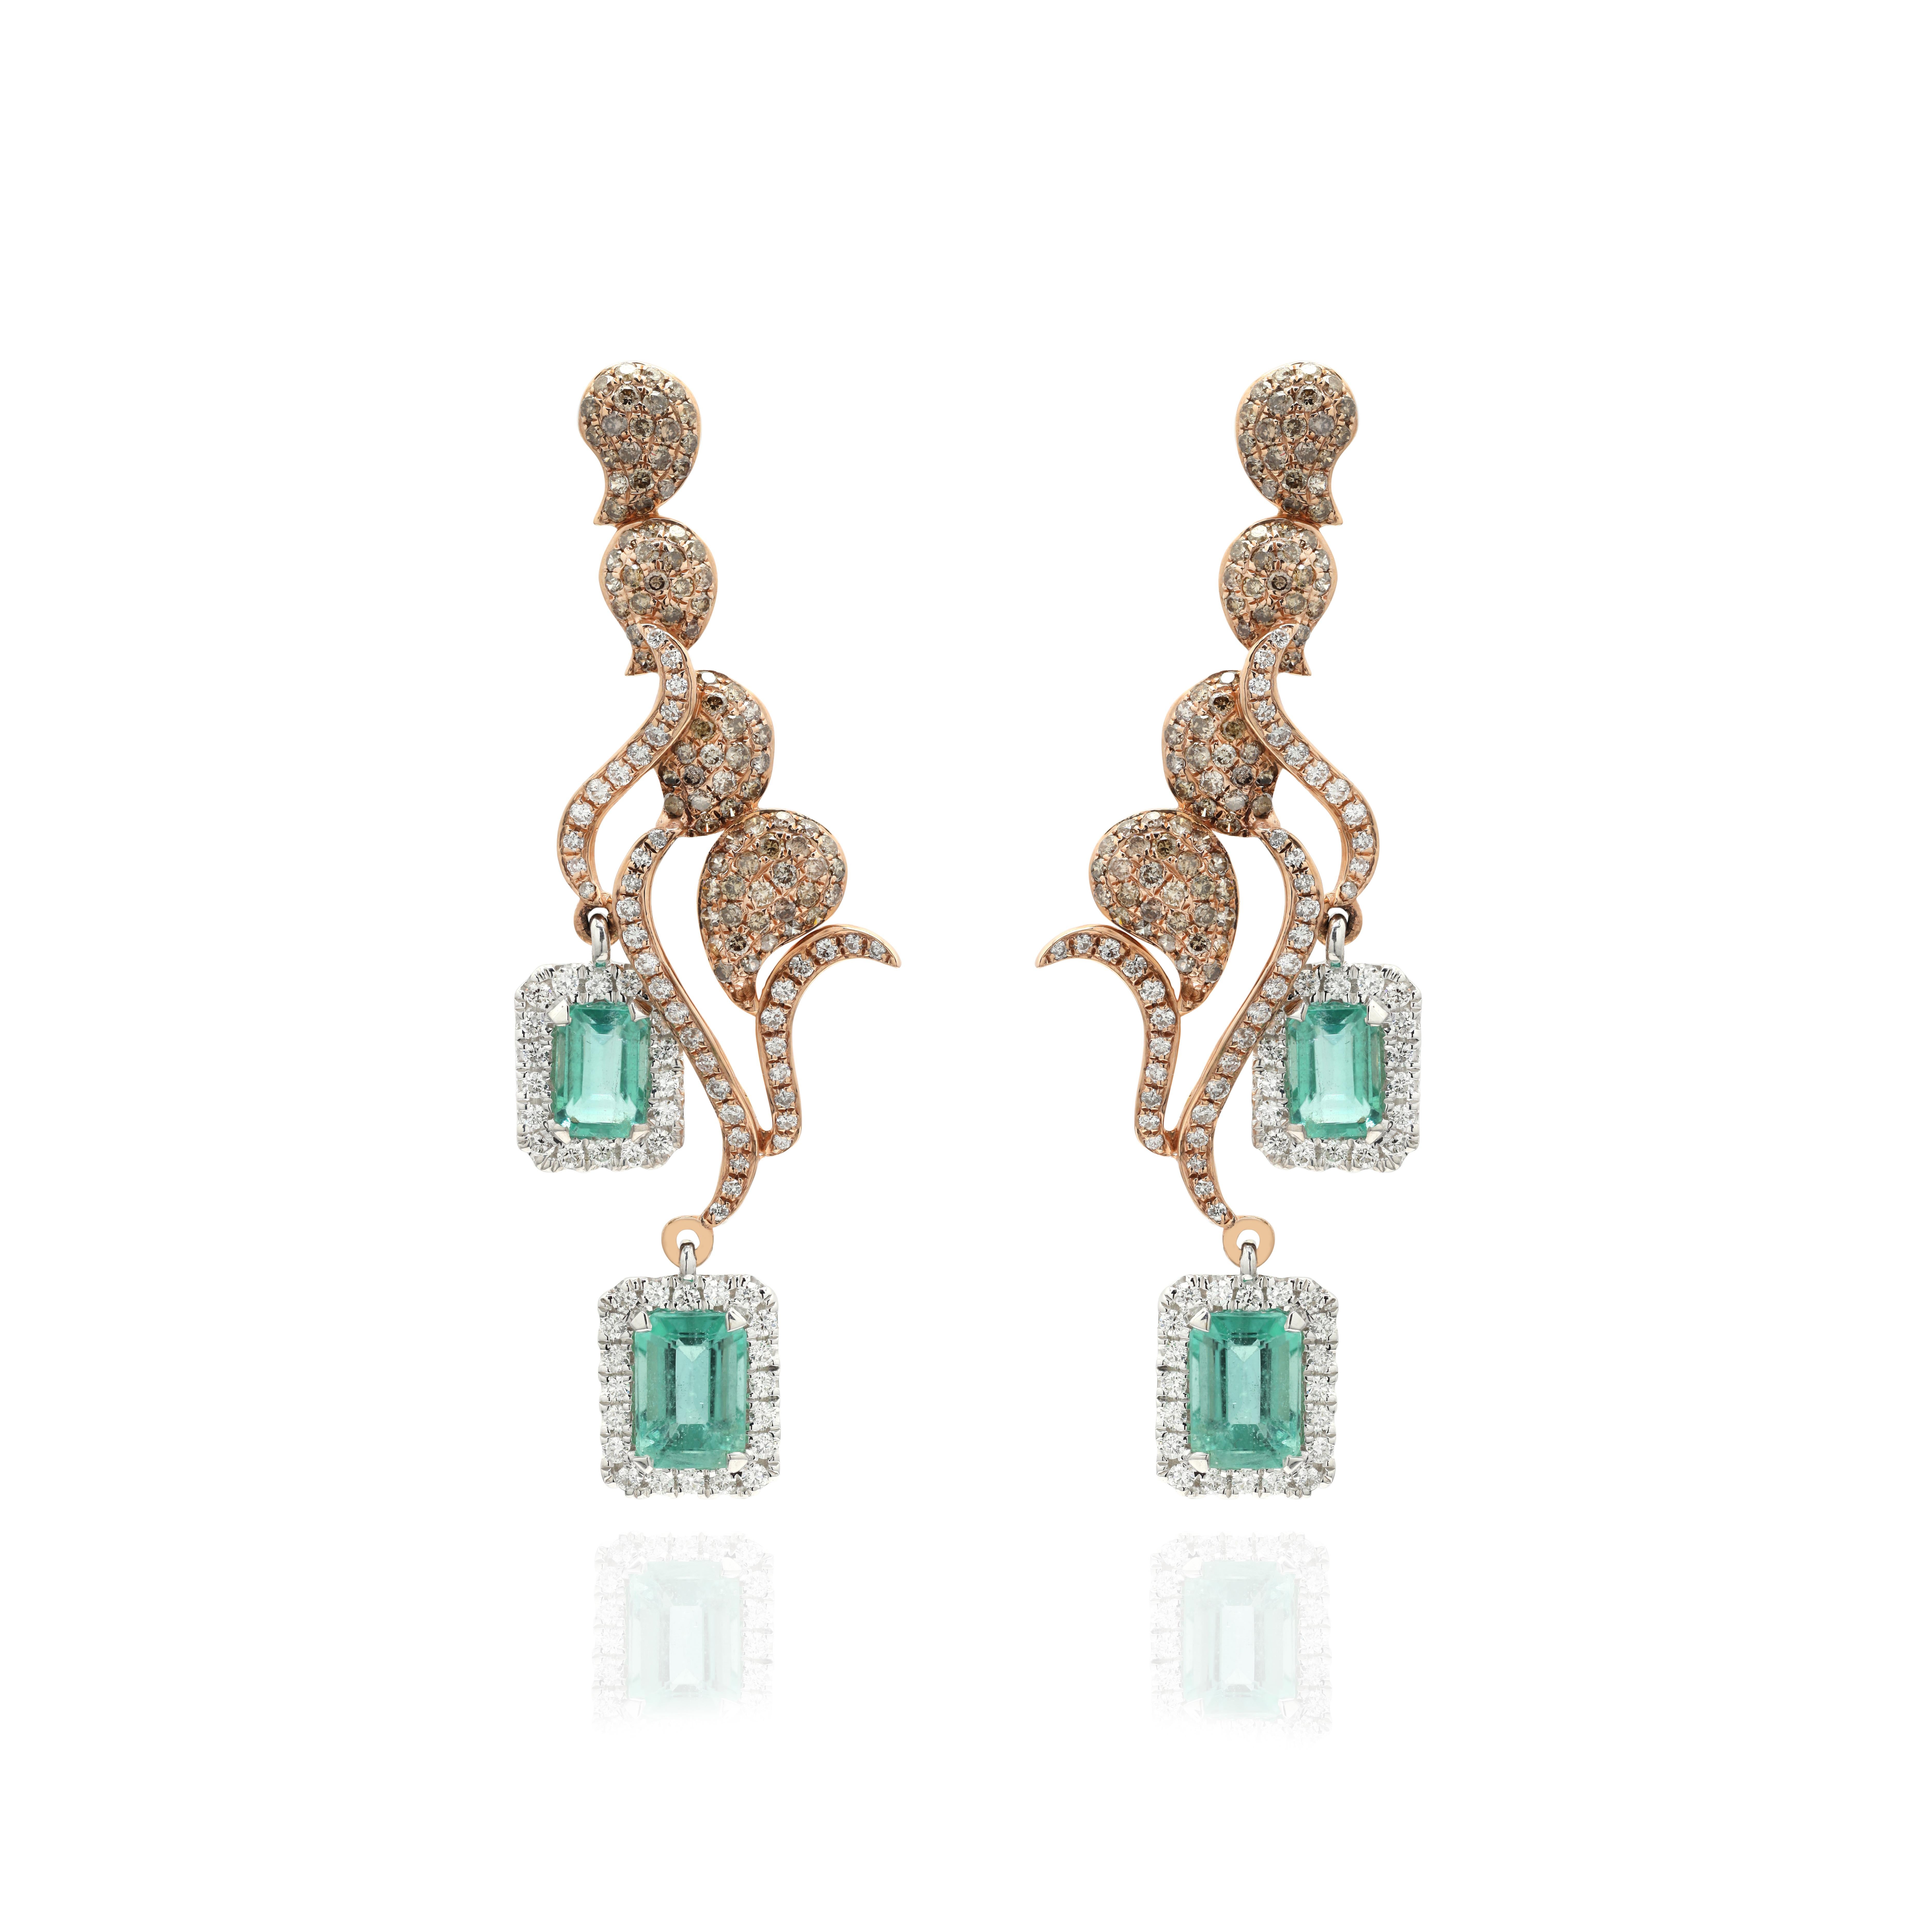 Designer Emerald and Diamond Dangle Earrings to make a statement with your look. These earrings create a sparkling, luxurious look featuring octagon cut gemstone.
If you love to gravitate towards unique styles, this piece of jewelry is perfect for